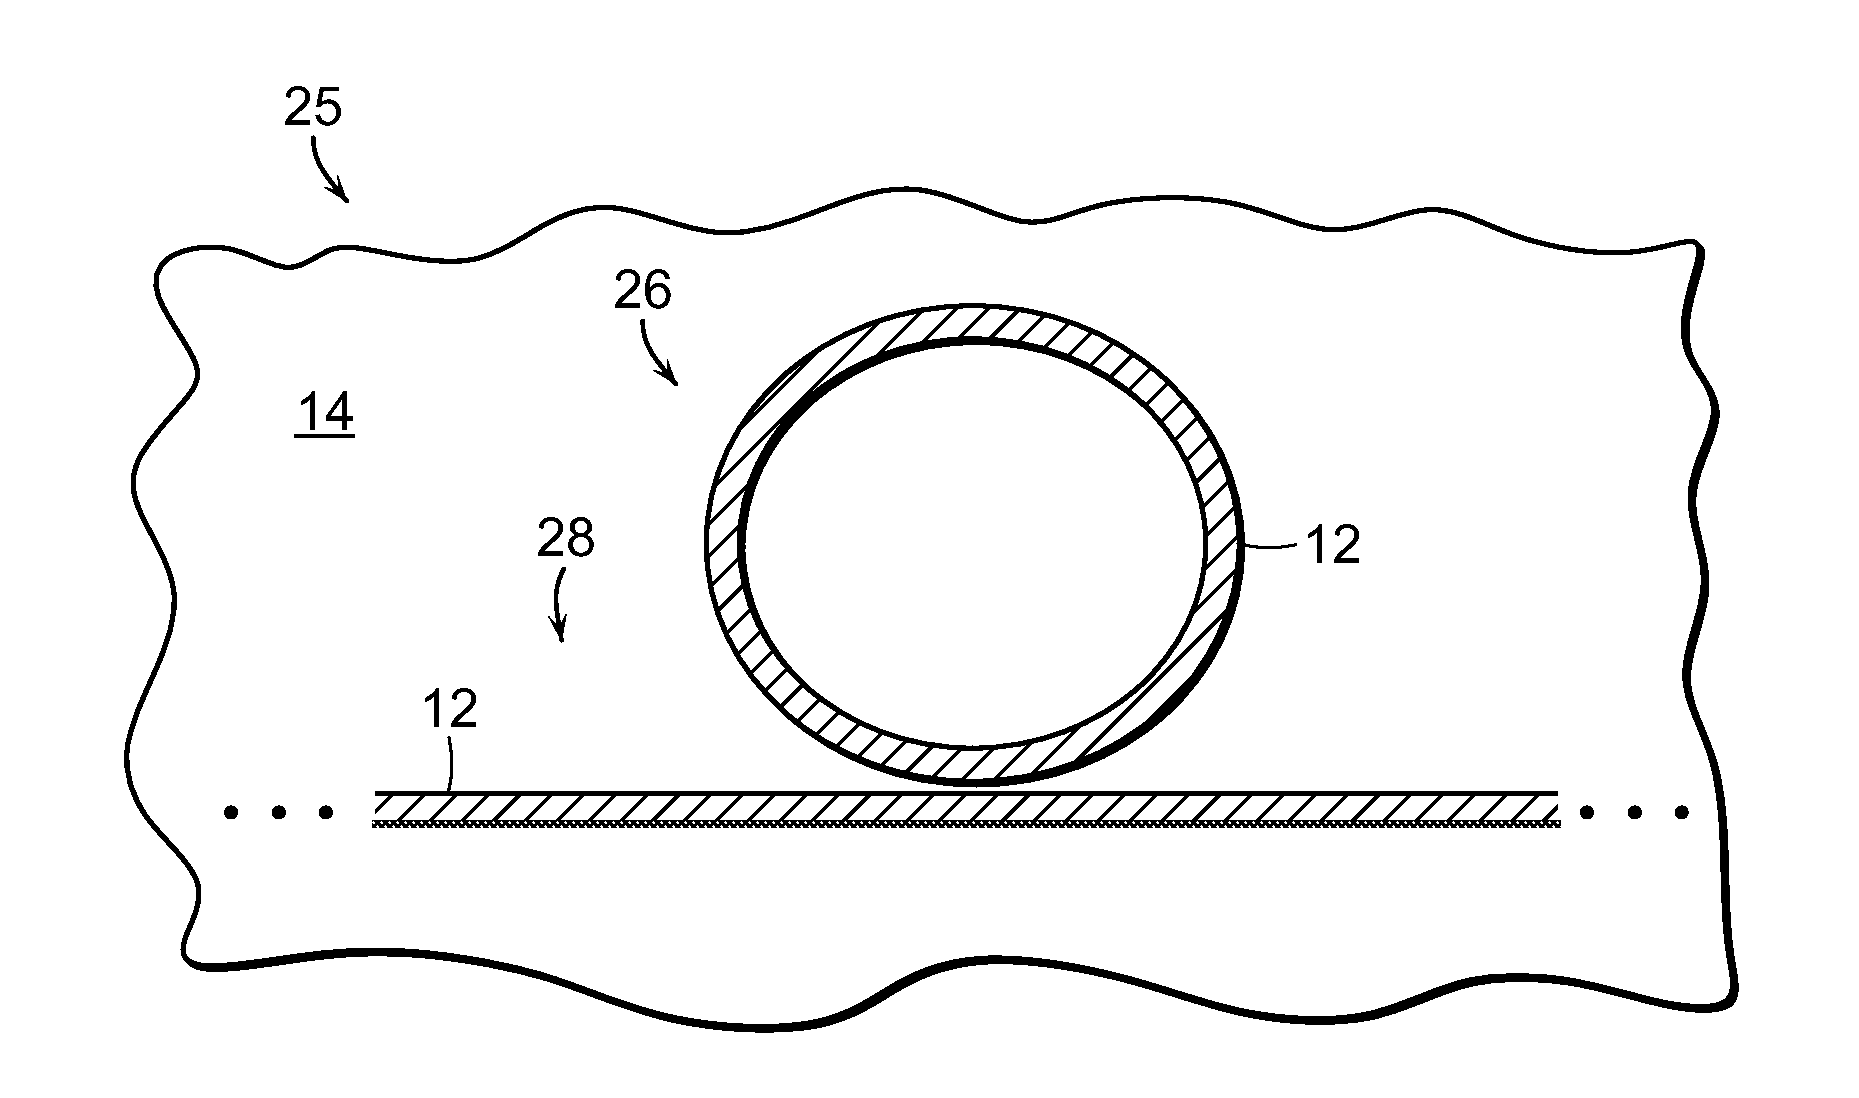 Athermal Photonic Waveguide With Refractive Index Tuning